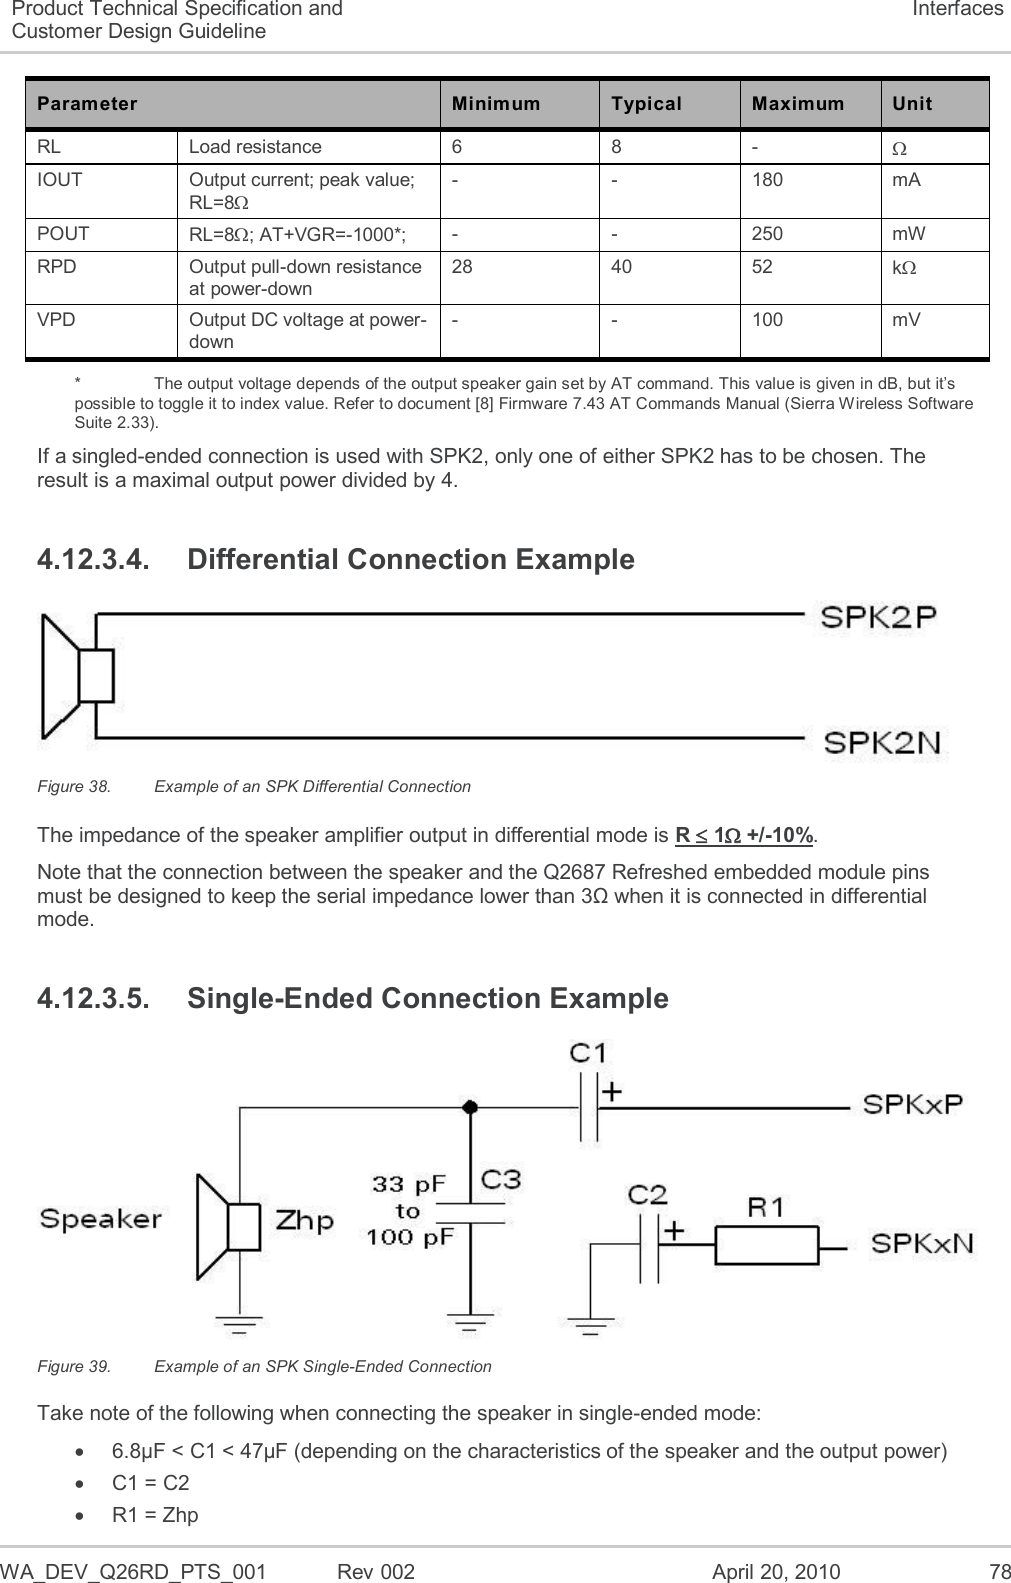  WA_DEV_Q26RD_PTS_001  Rev 002  April 20, 2010 78 Product Technical Specification and Customer Design Guideline Interfaces Parameter Minimum Typical Maximum Unit RL Load resistance 6 8 -  IOUT Output current; peak value; RL=8 - - 180 mA POUT RL=8; AT+VGR=-1000*; - - 250 mW RPD Output pull-down resistance at power-down 28 40 52 k VPD Output DC voltage at power-down - - 100 mV *    The output voltage depends of the output speaker gain set by AT command. This value is given in dB, but it’s possible to toggle it to index value. Refer to document [8] Firmware 7.43 AT Commands Manual (Sierra Wireless Software Suite 2.33). If a singled-ended connection is used with SPK2, only one of either SPK2 has to be chosen. The result is a maximal output power divided by 4. 4.12.3.4.  Differential Connection Example  Figure 38.  Example of an SPK Differential Connection The impedance of the speaker amplifier output in differential mode is R  1 +/-10%. Note that the connection between the speaker and the Q2687 Refreshed embedded module pins must be designed to keep the serial impedance lower than 3Ω when it is connected in differential mode. 4.12.3.5.  Single-Ended Connection Example  Figure 39.  Example of an SPK Single-Ended Connection Take note of the following when connecting the speaker in single-ended mode:   6.8µF &lt; C1 &lt; 47µF (depending on the characteristics of the speaker and the output power)   C1 = C2   R1 = Zhp 